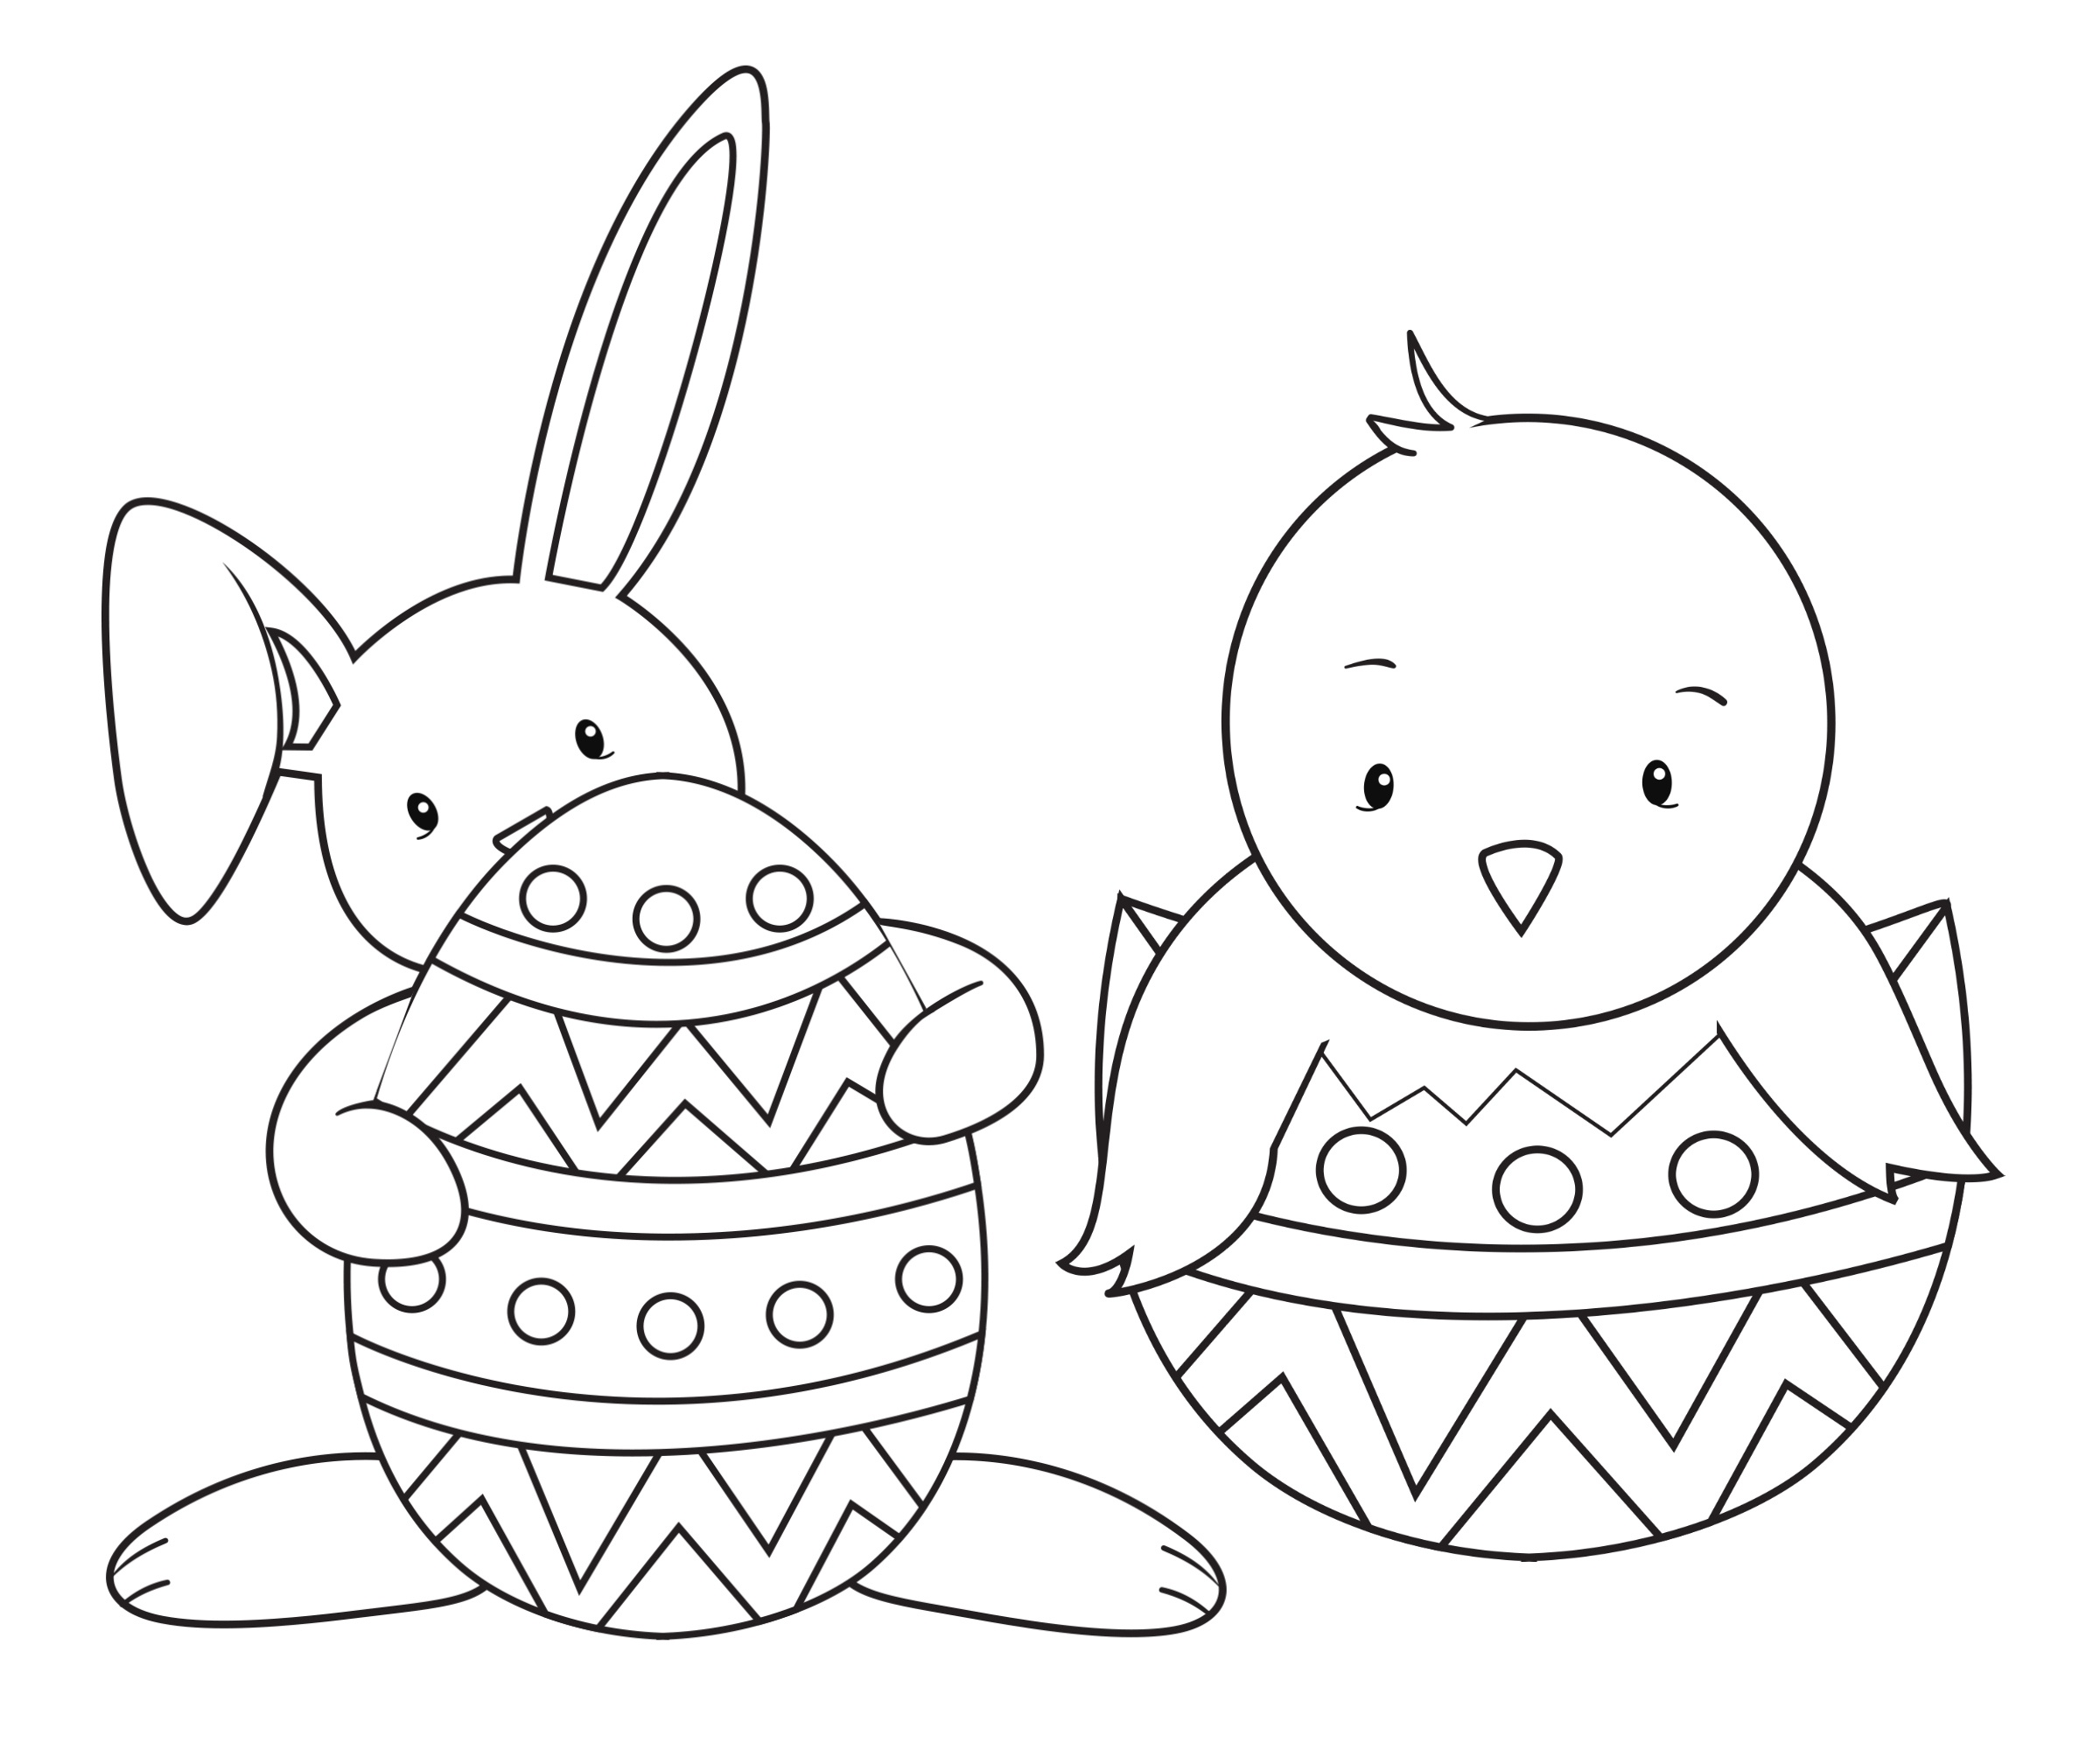 Easter Coloring Pages For Kids - Crazy Little Projects - Free Printable Coloring Pages Easter Basket